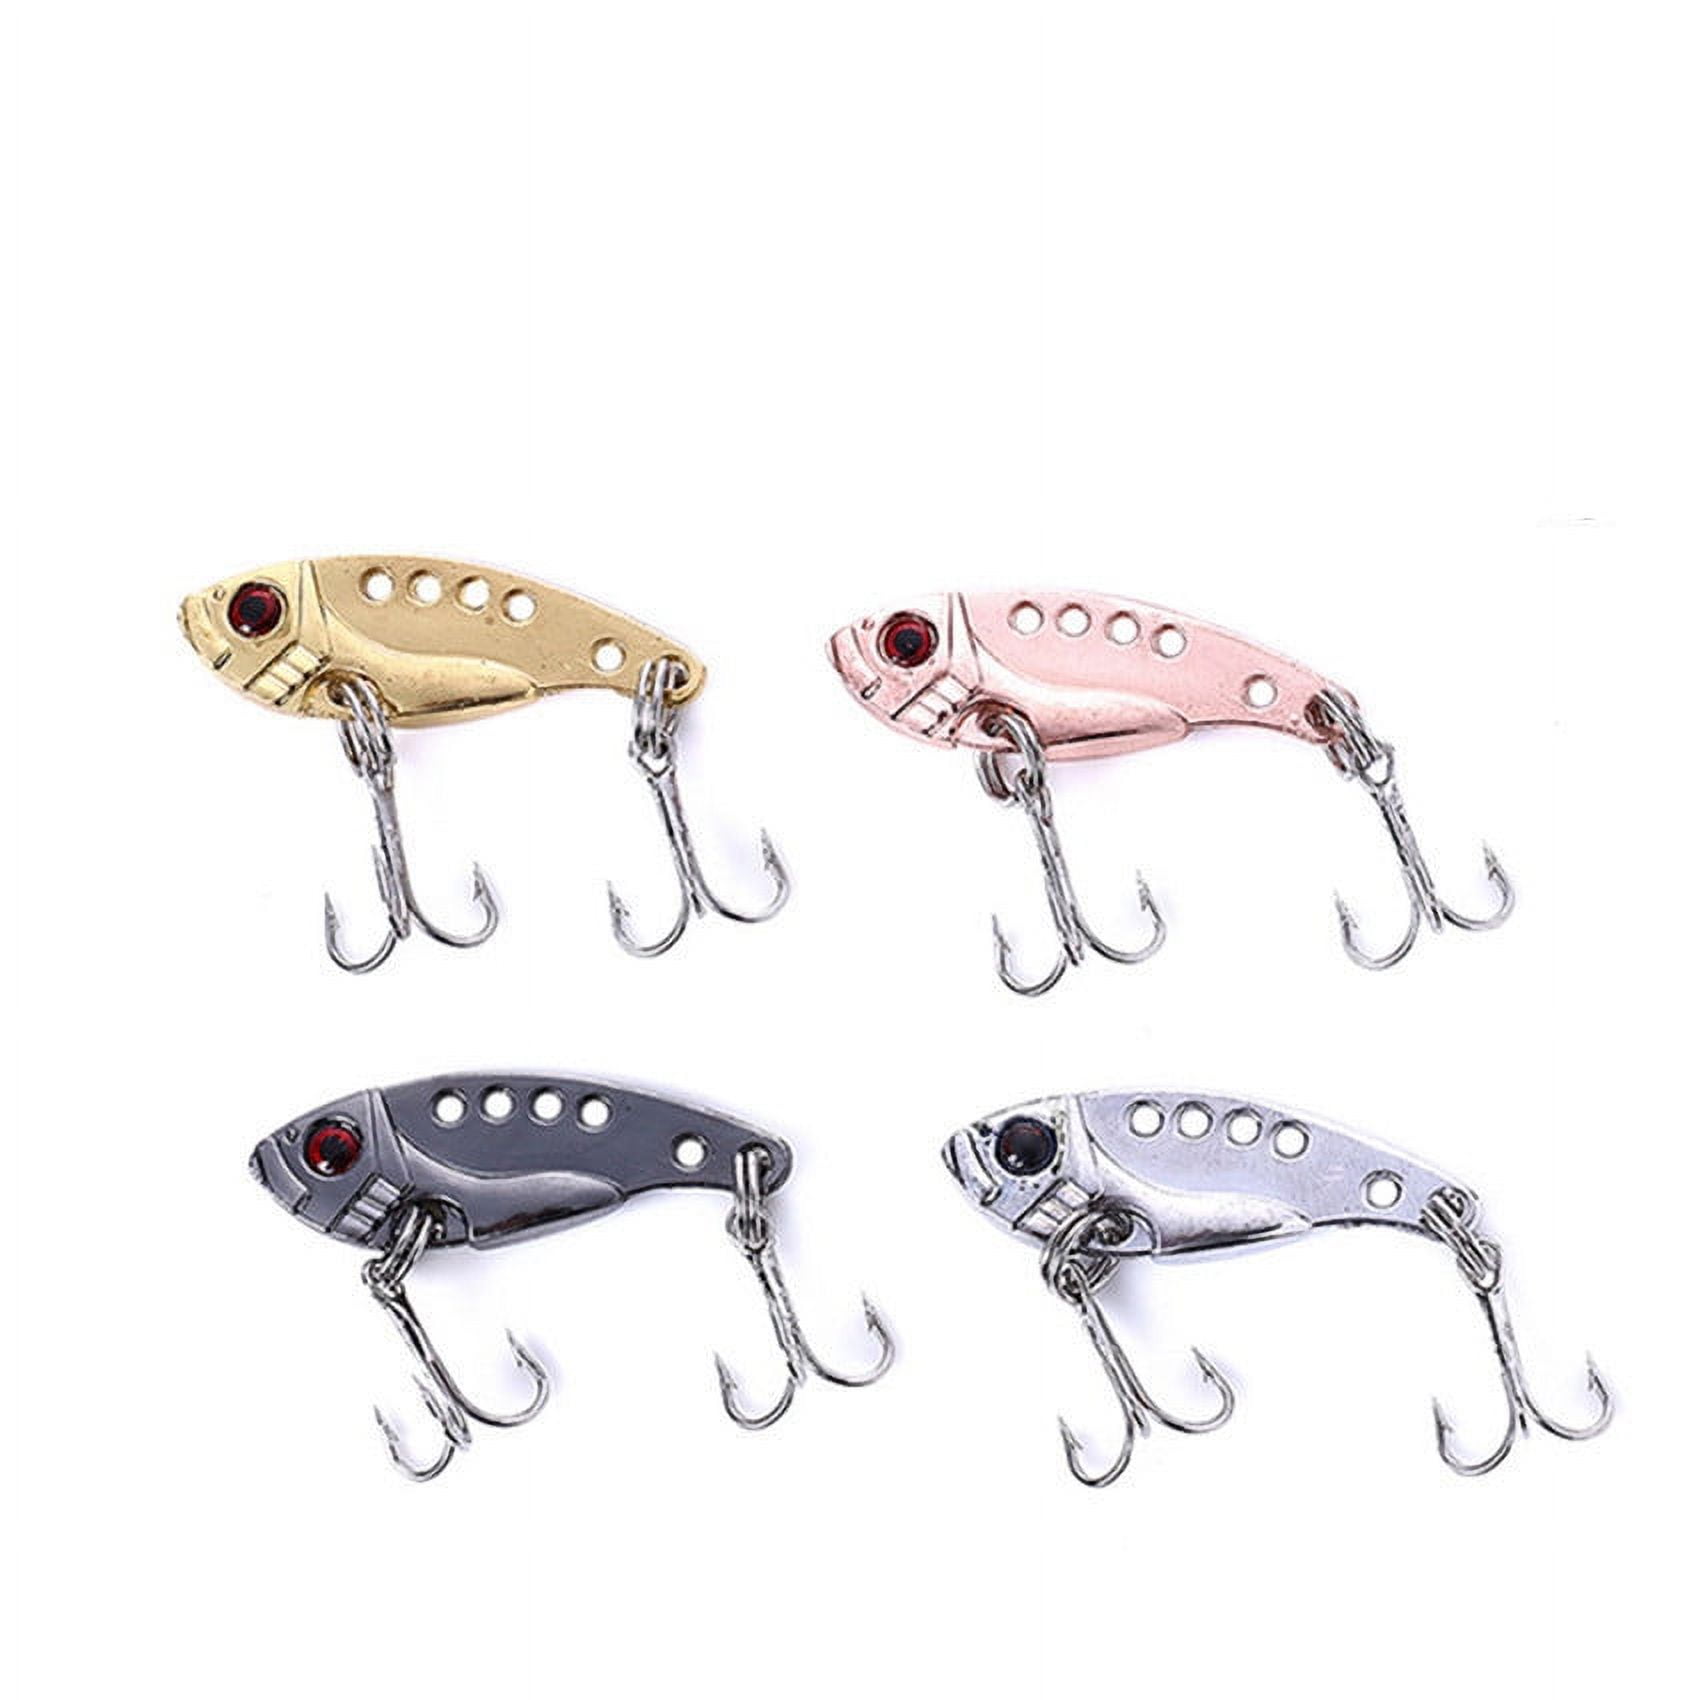  6PCS Funny Fishing Lures, Bass Fishing Lures, Spinner